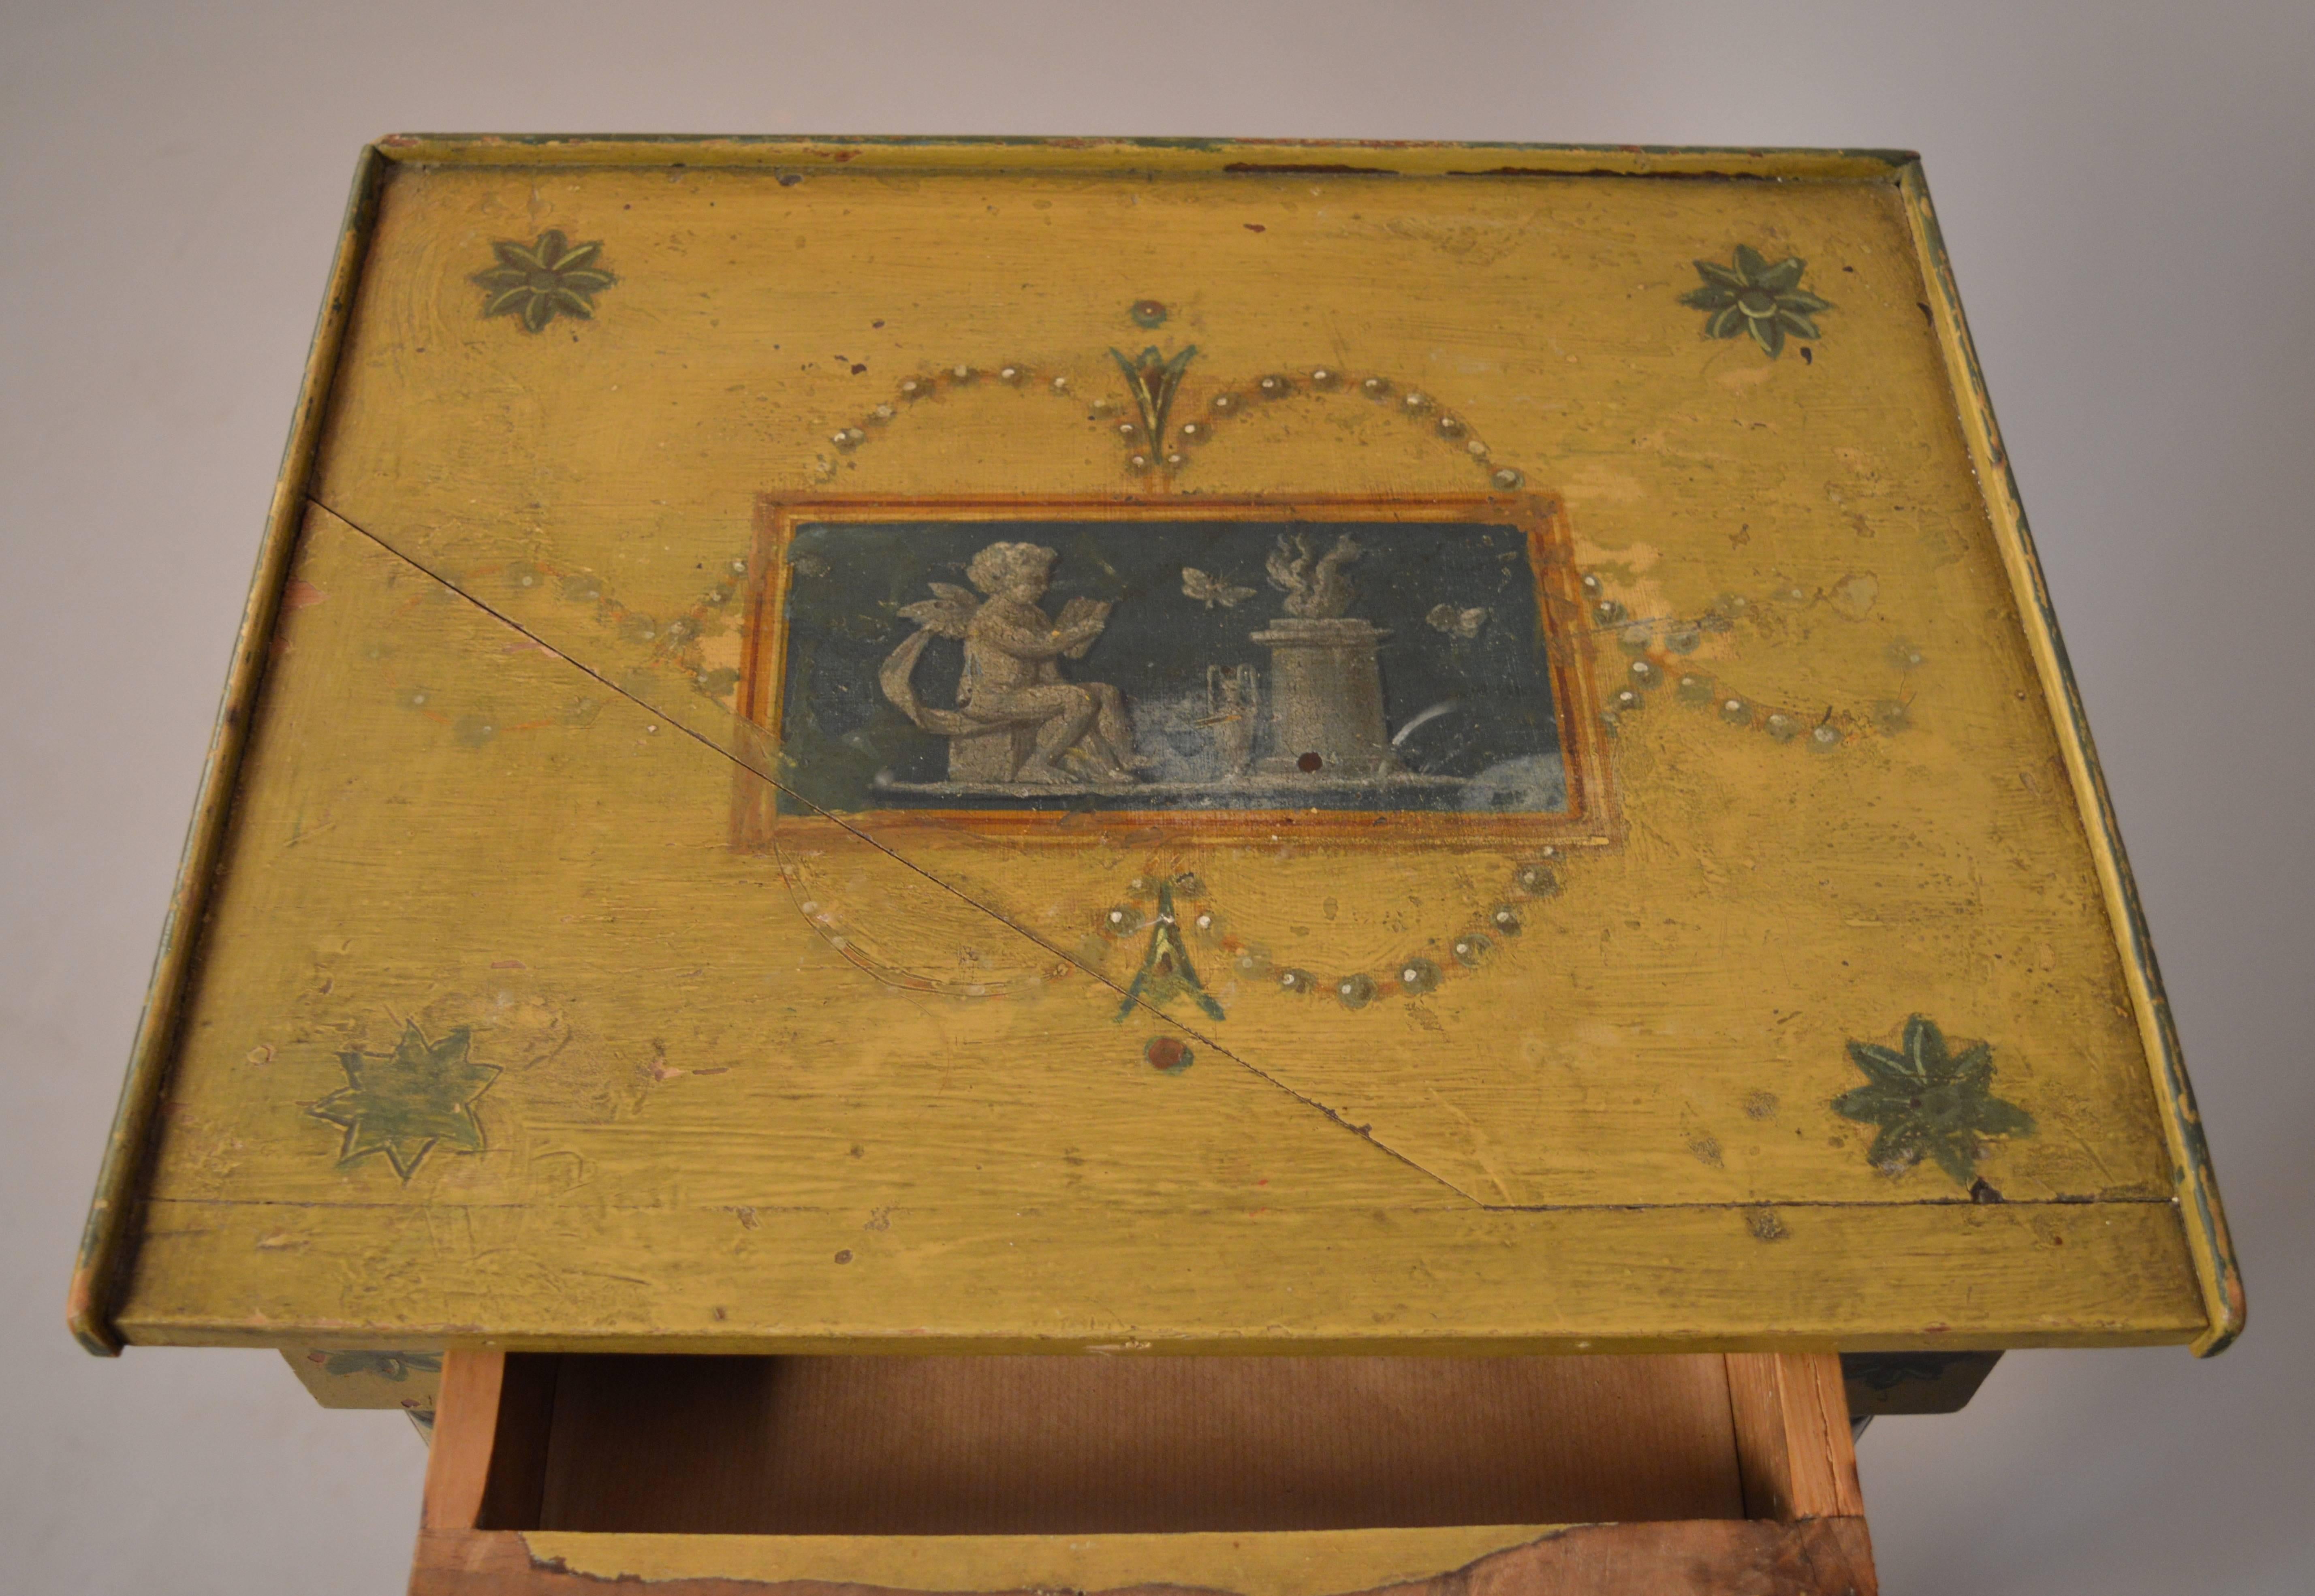 19th Century Austrian Side Table with Three-Drawers and Paintings of Angels (19. Jahrhundert)